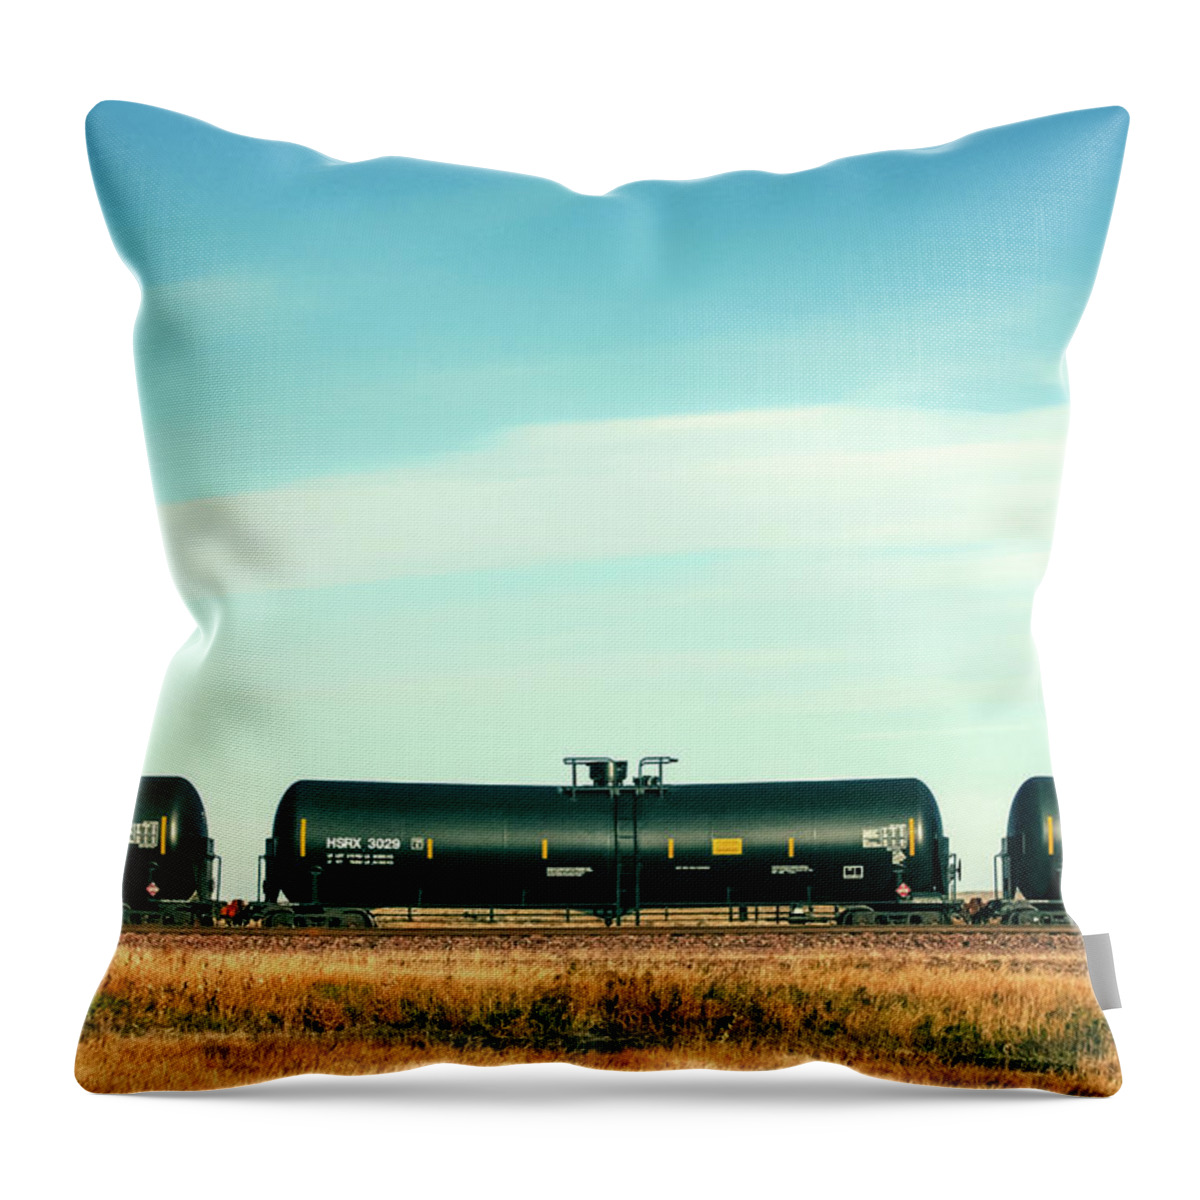 Oil Throw Pillow featuring the photograph Tank Car Row by Todd Klassy